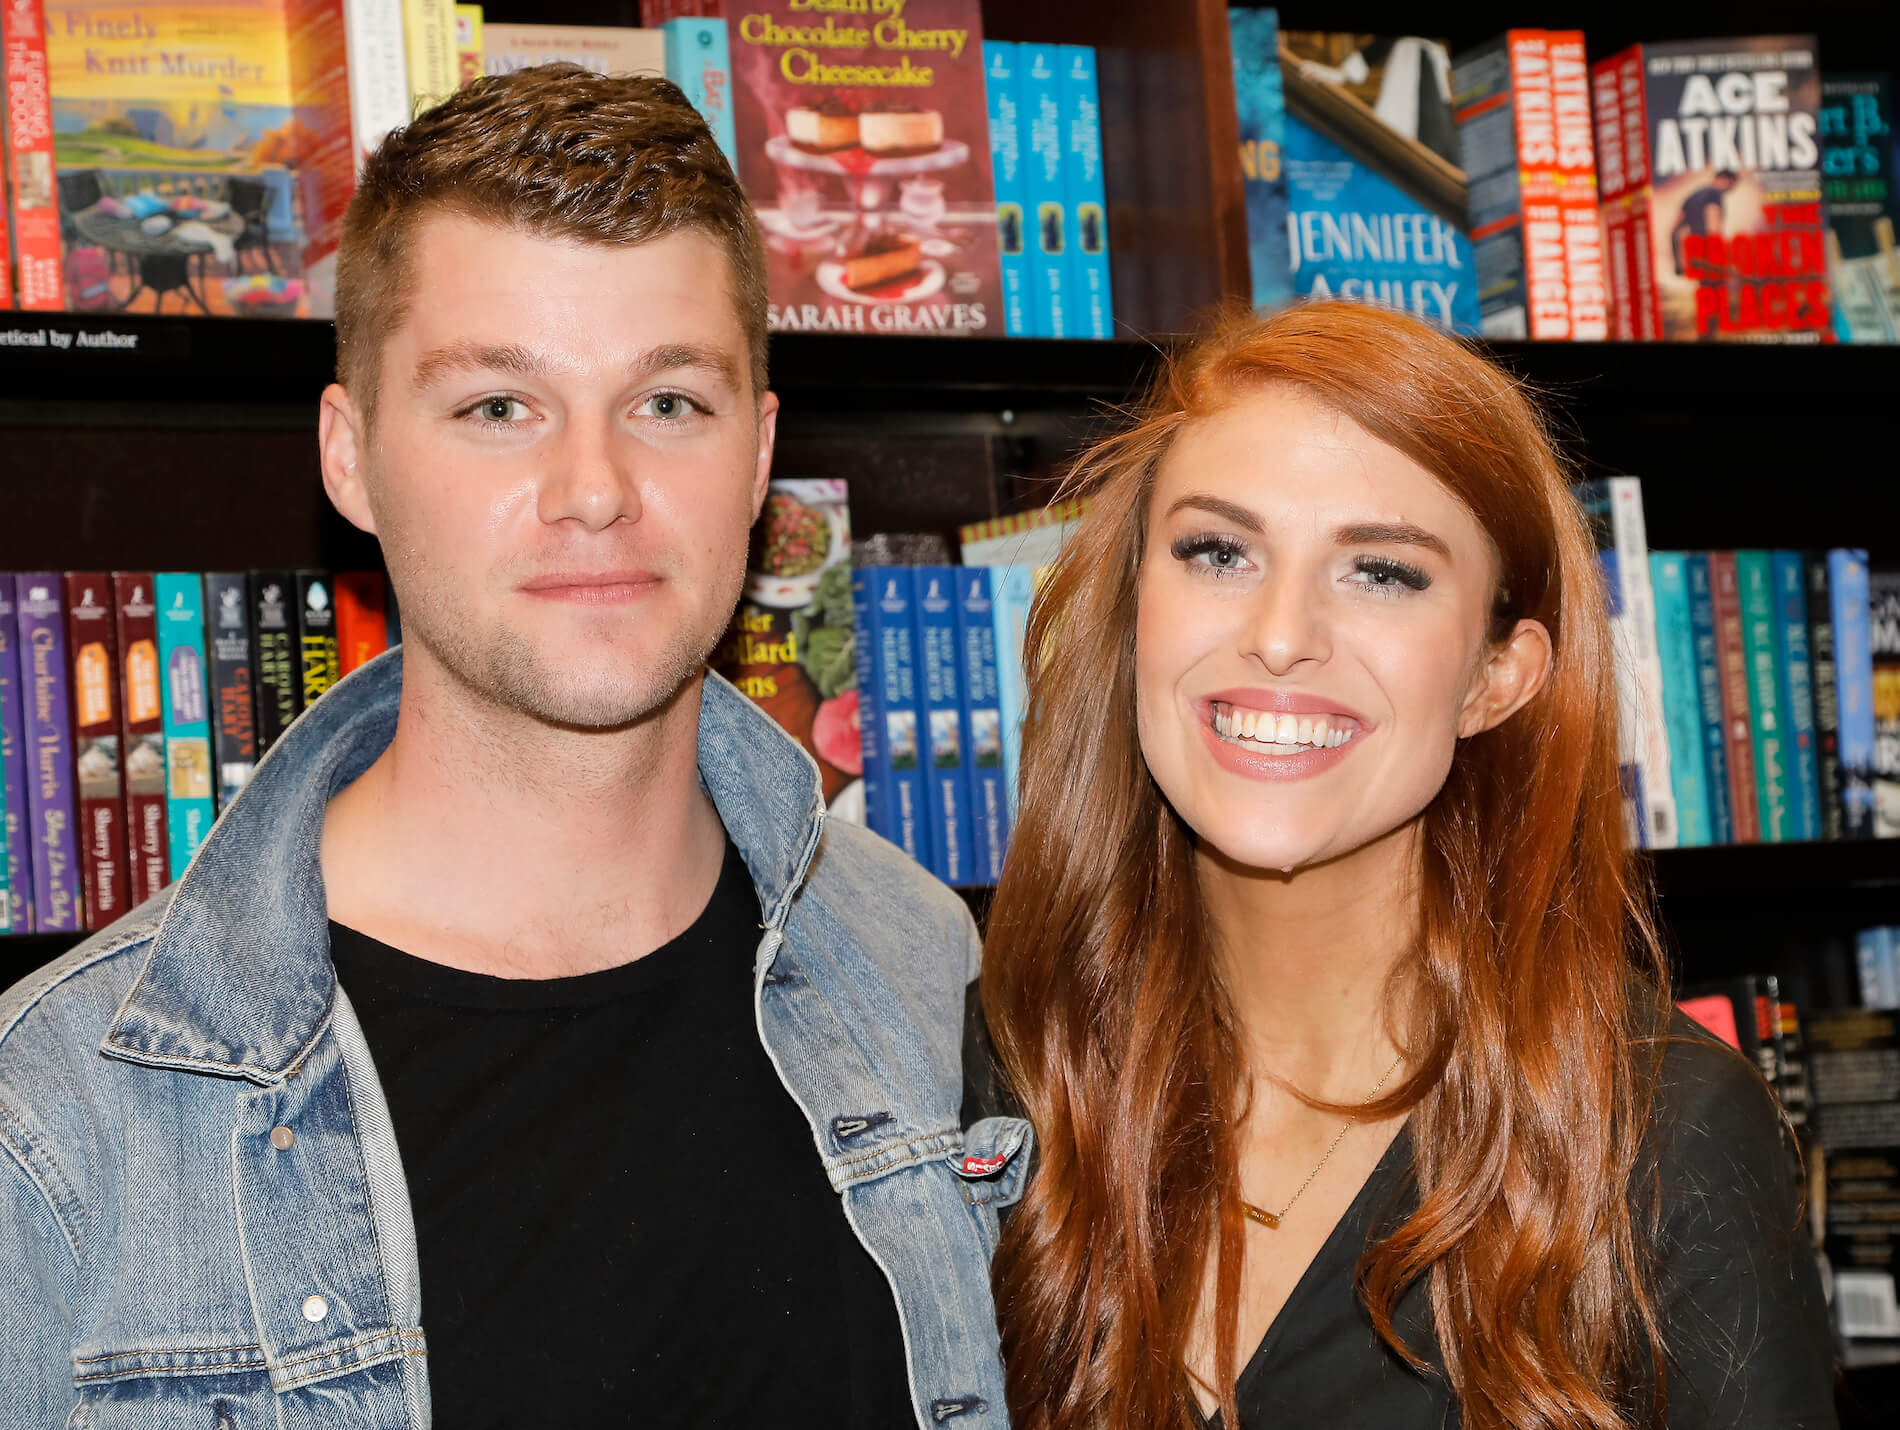 Jeremy and Audrey Roloff from 'Little People, Big World' posing together in front of a bookshelf